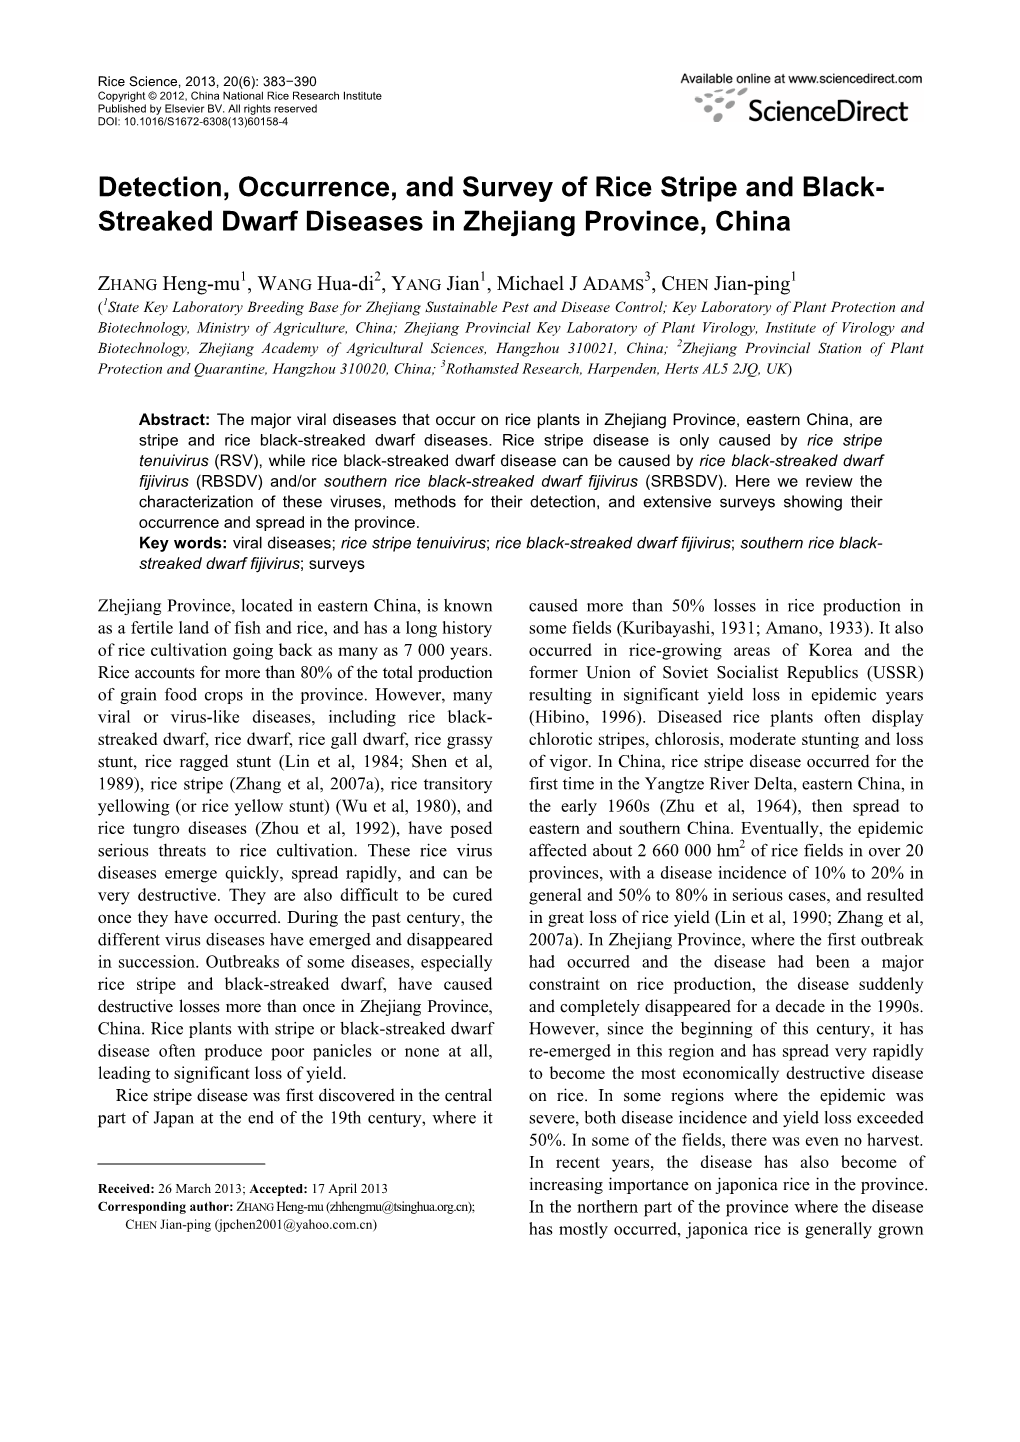 Detection, Occurrence, and Survey of Rice Stripe and Black-Streaked Dwarf Diseases in Zhejiang Province, China